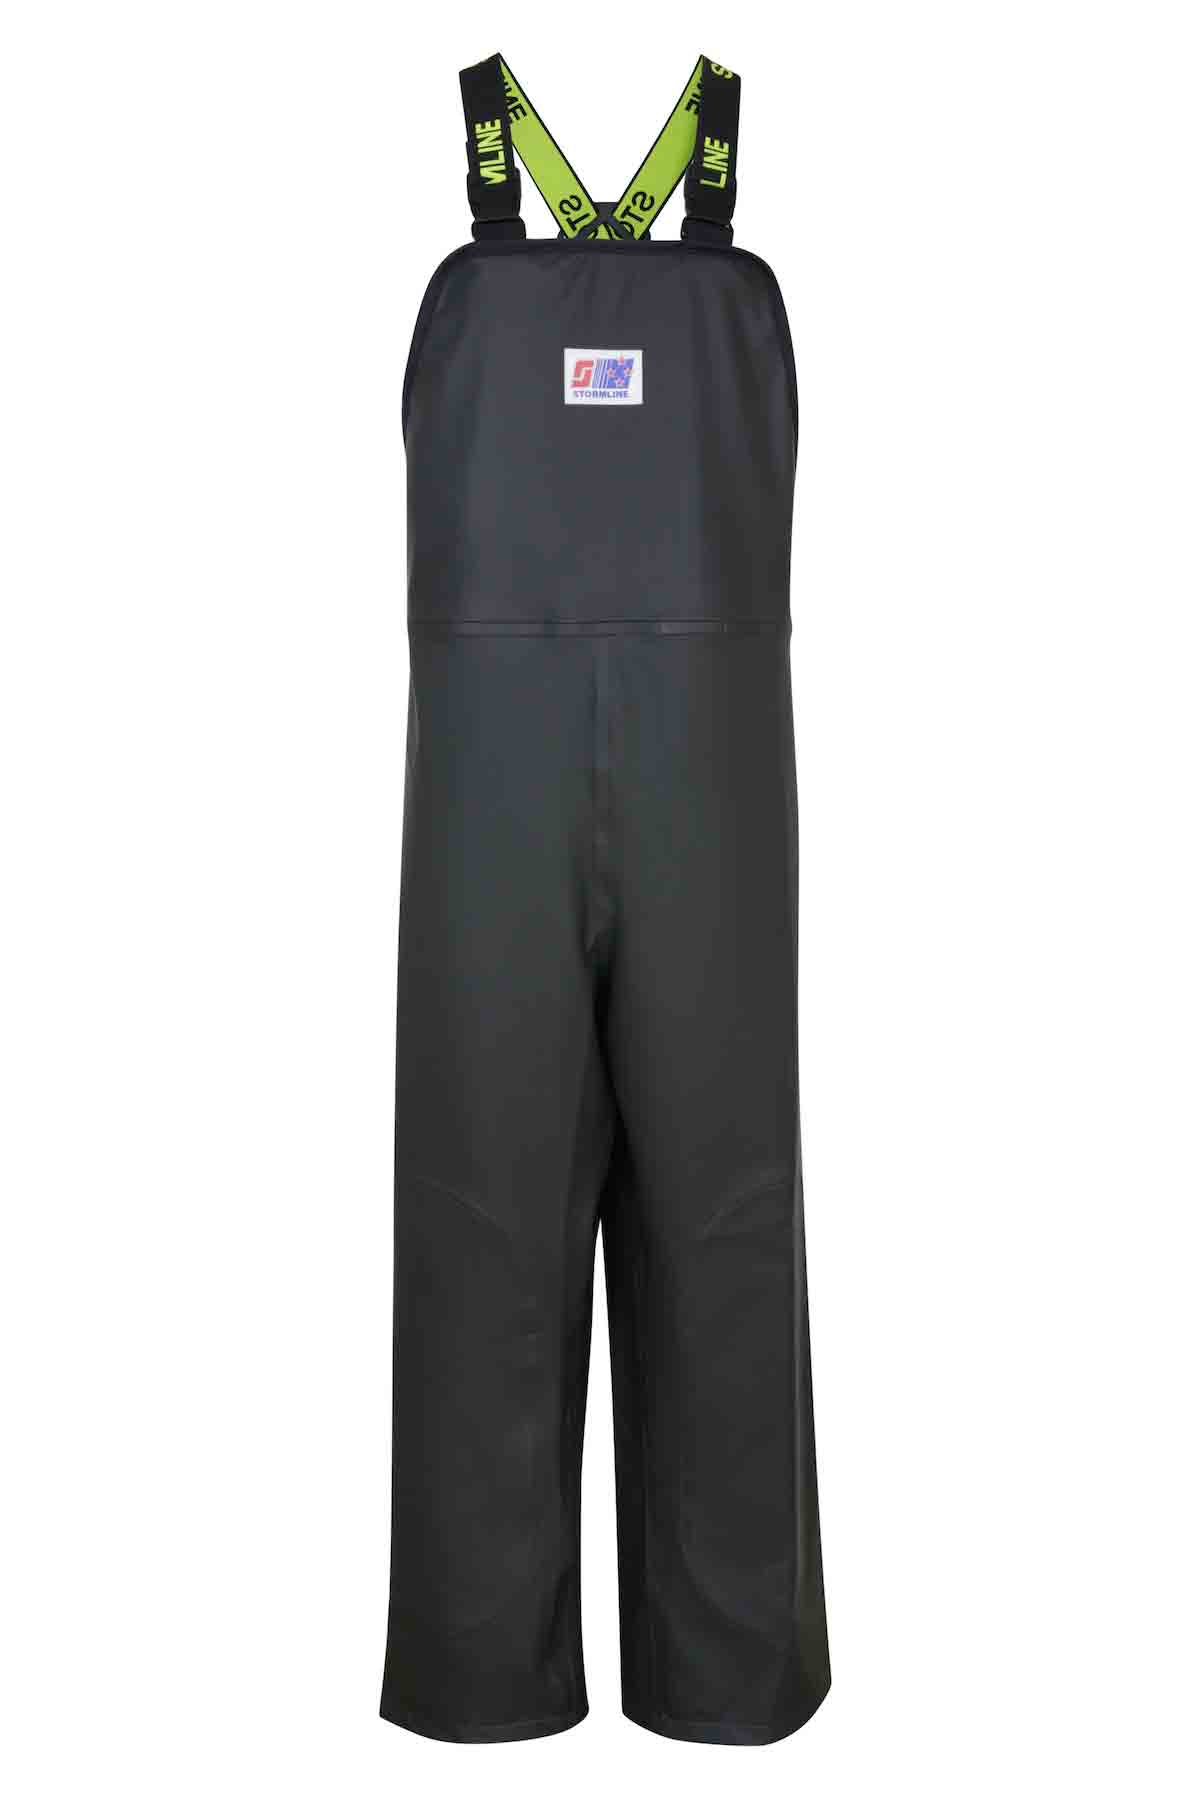 Agriculture Seals Stormshield Waterproof Over Trousers